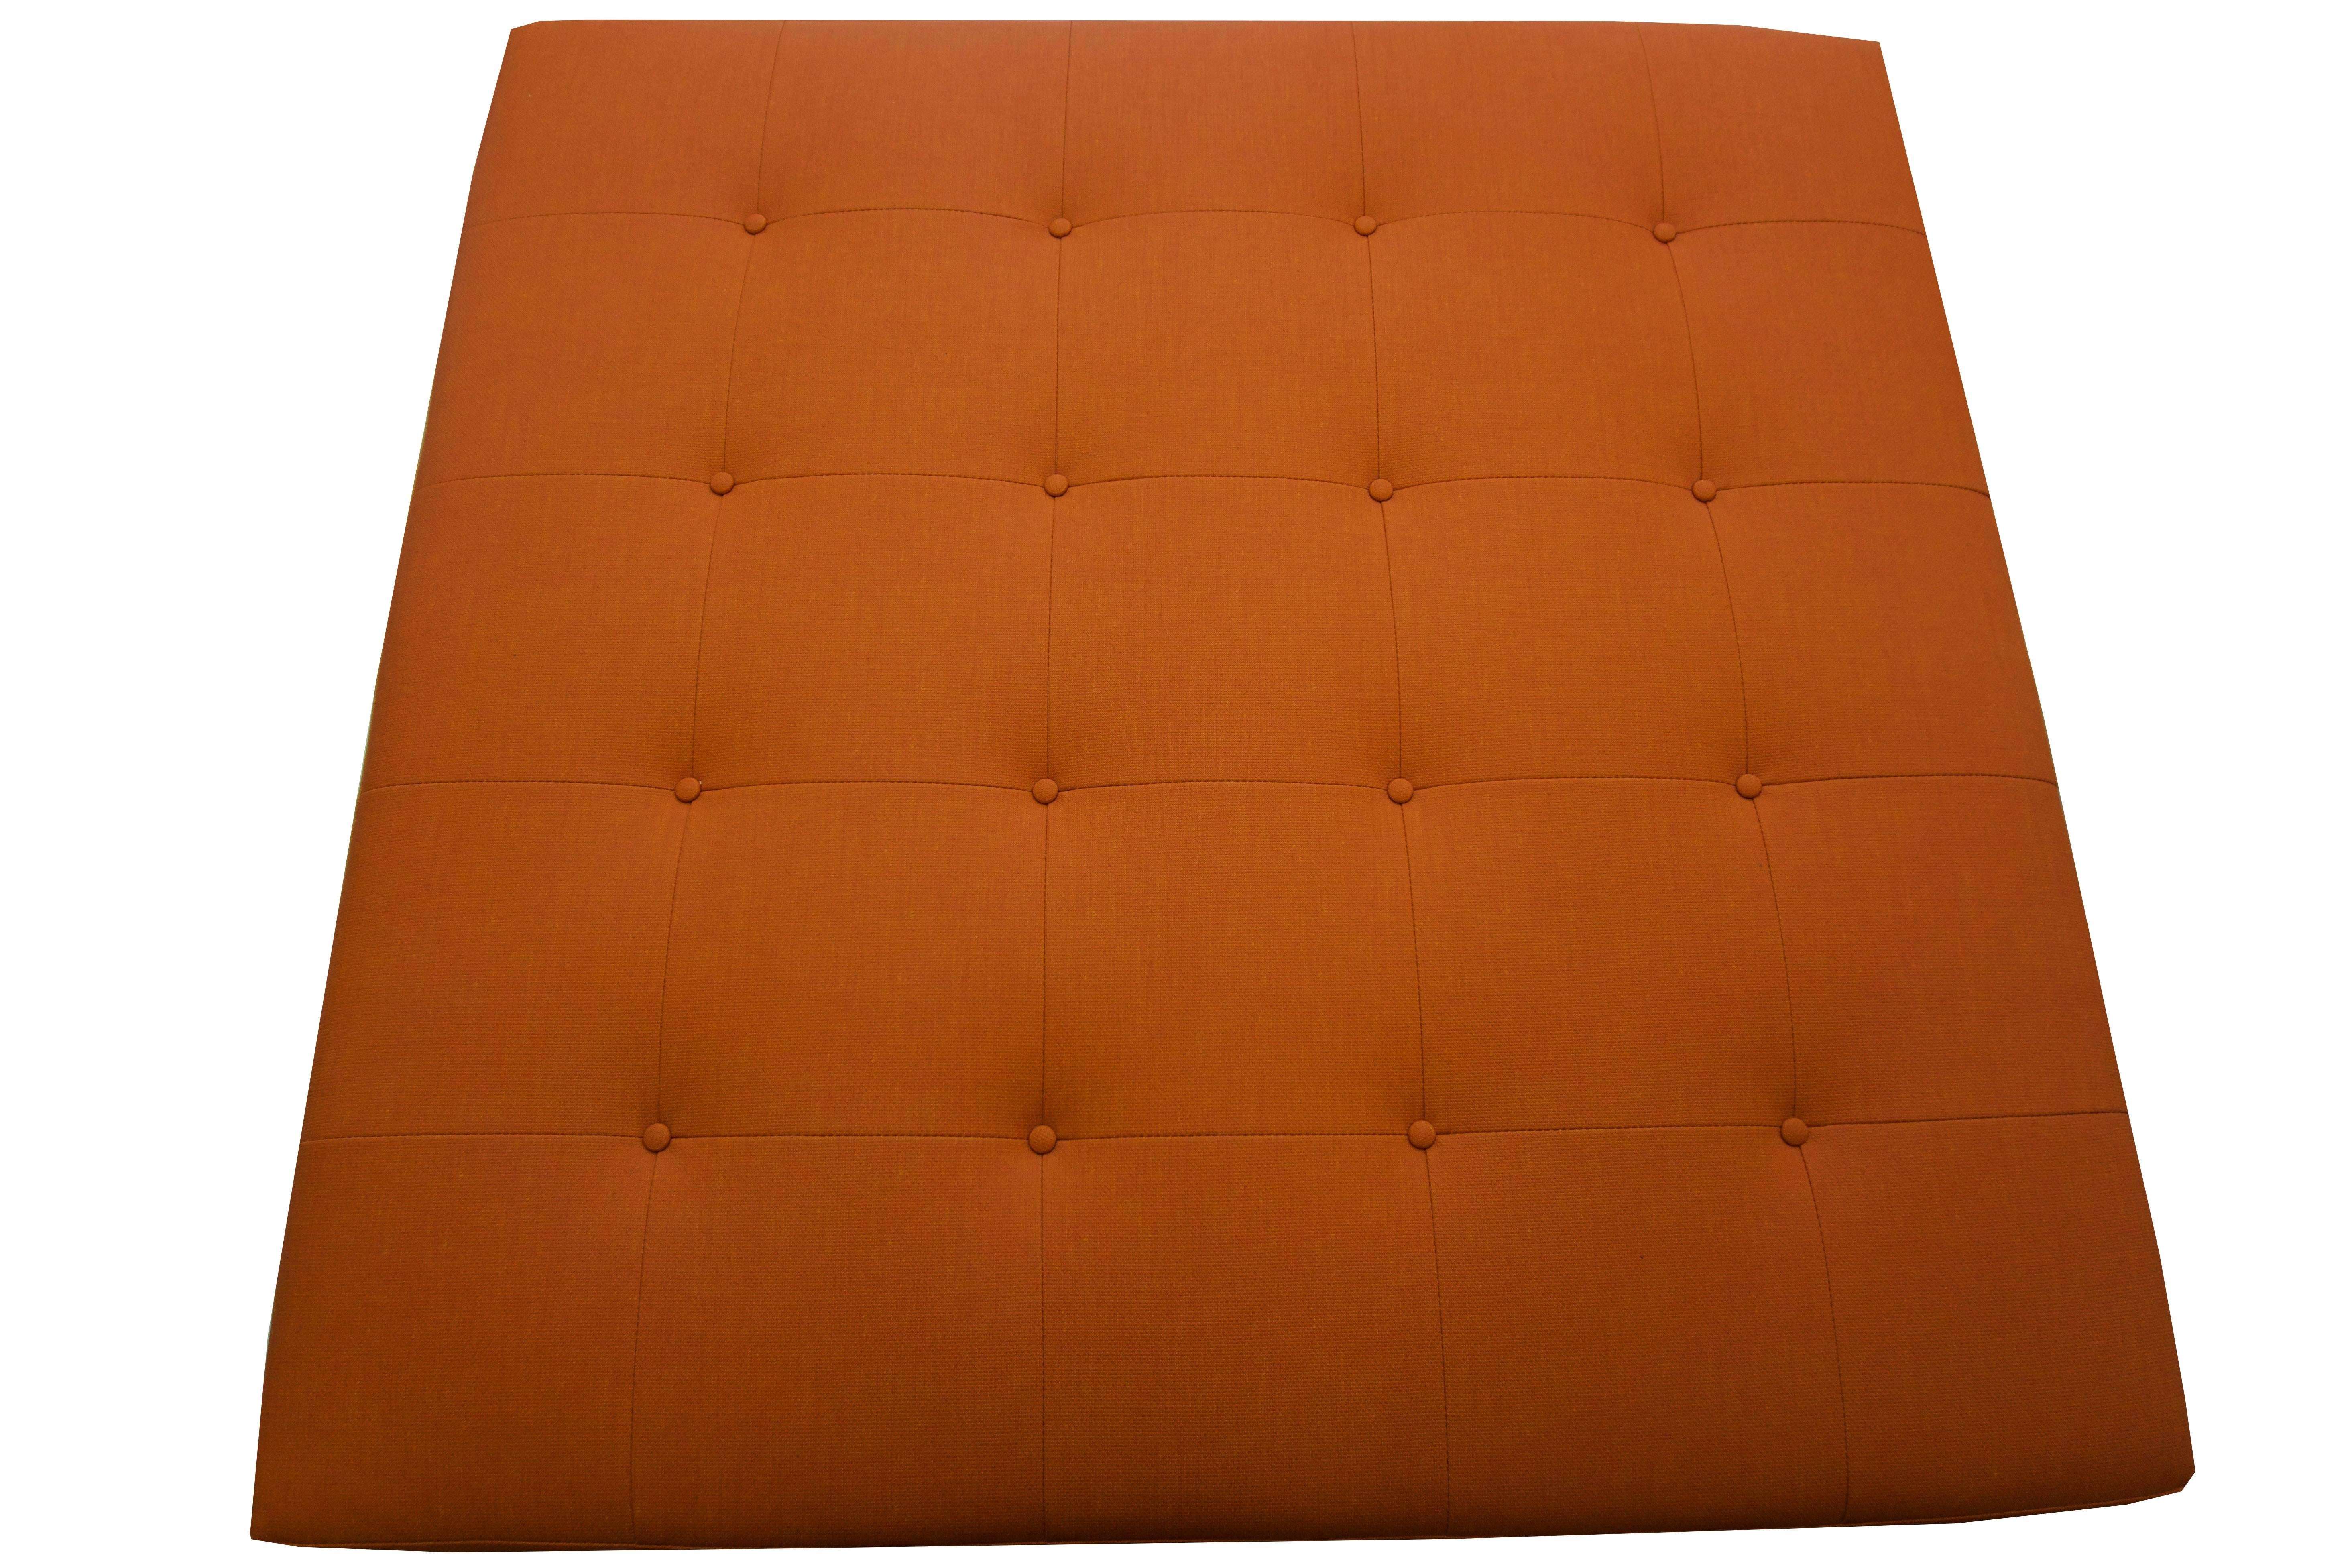 Orange vinyl ottoman made by us in Norwalk, Connecticut.
A comfy add to your room, this ottoman is big enough for you and your friends to lounge and rest upon.